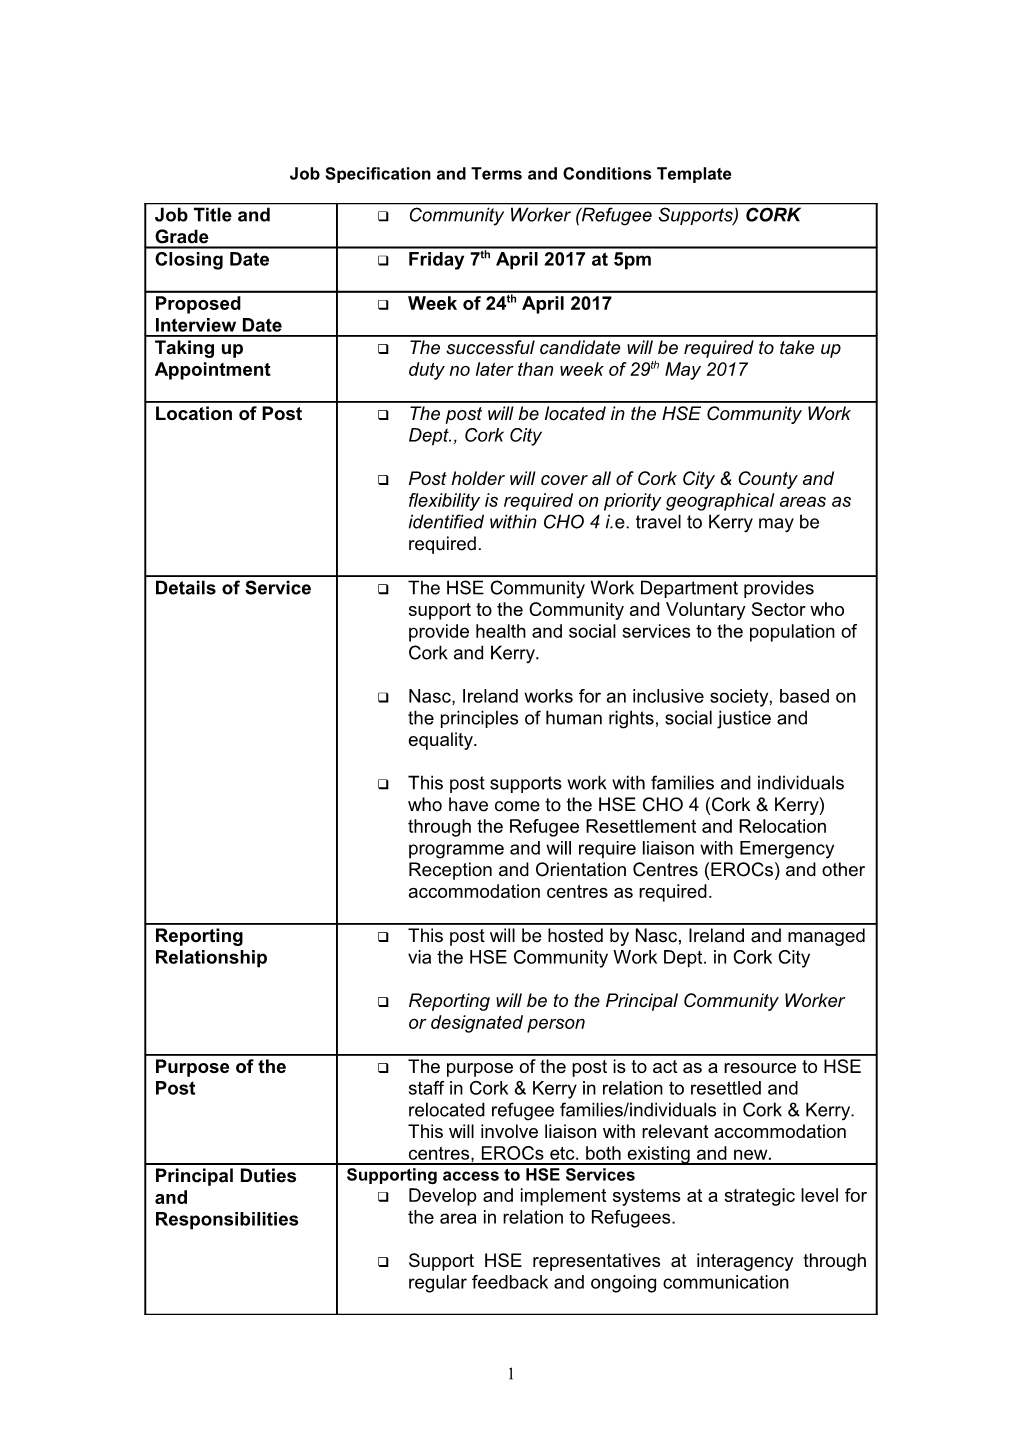 Job Specification and Terms and Conditions Template